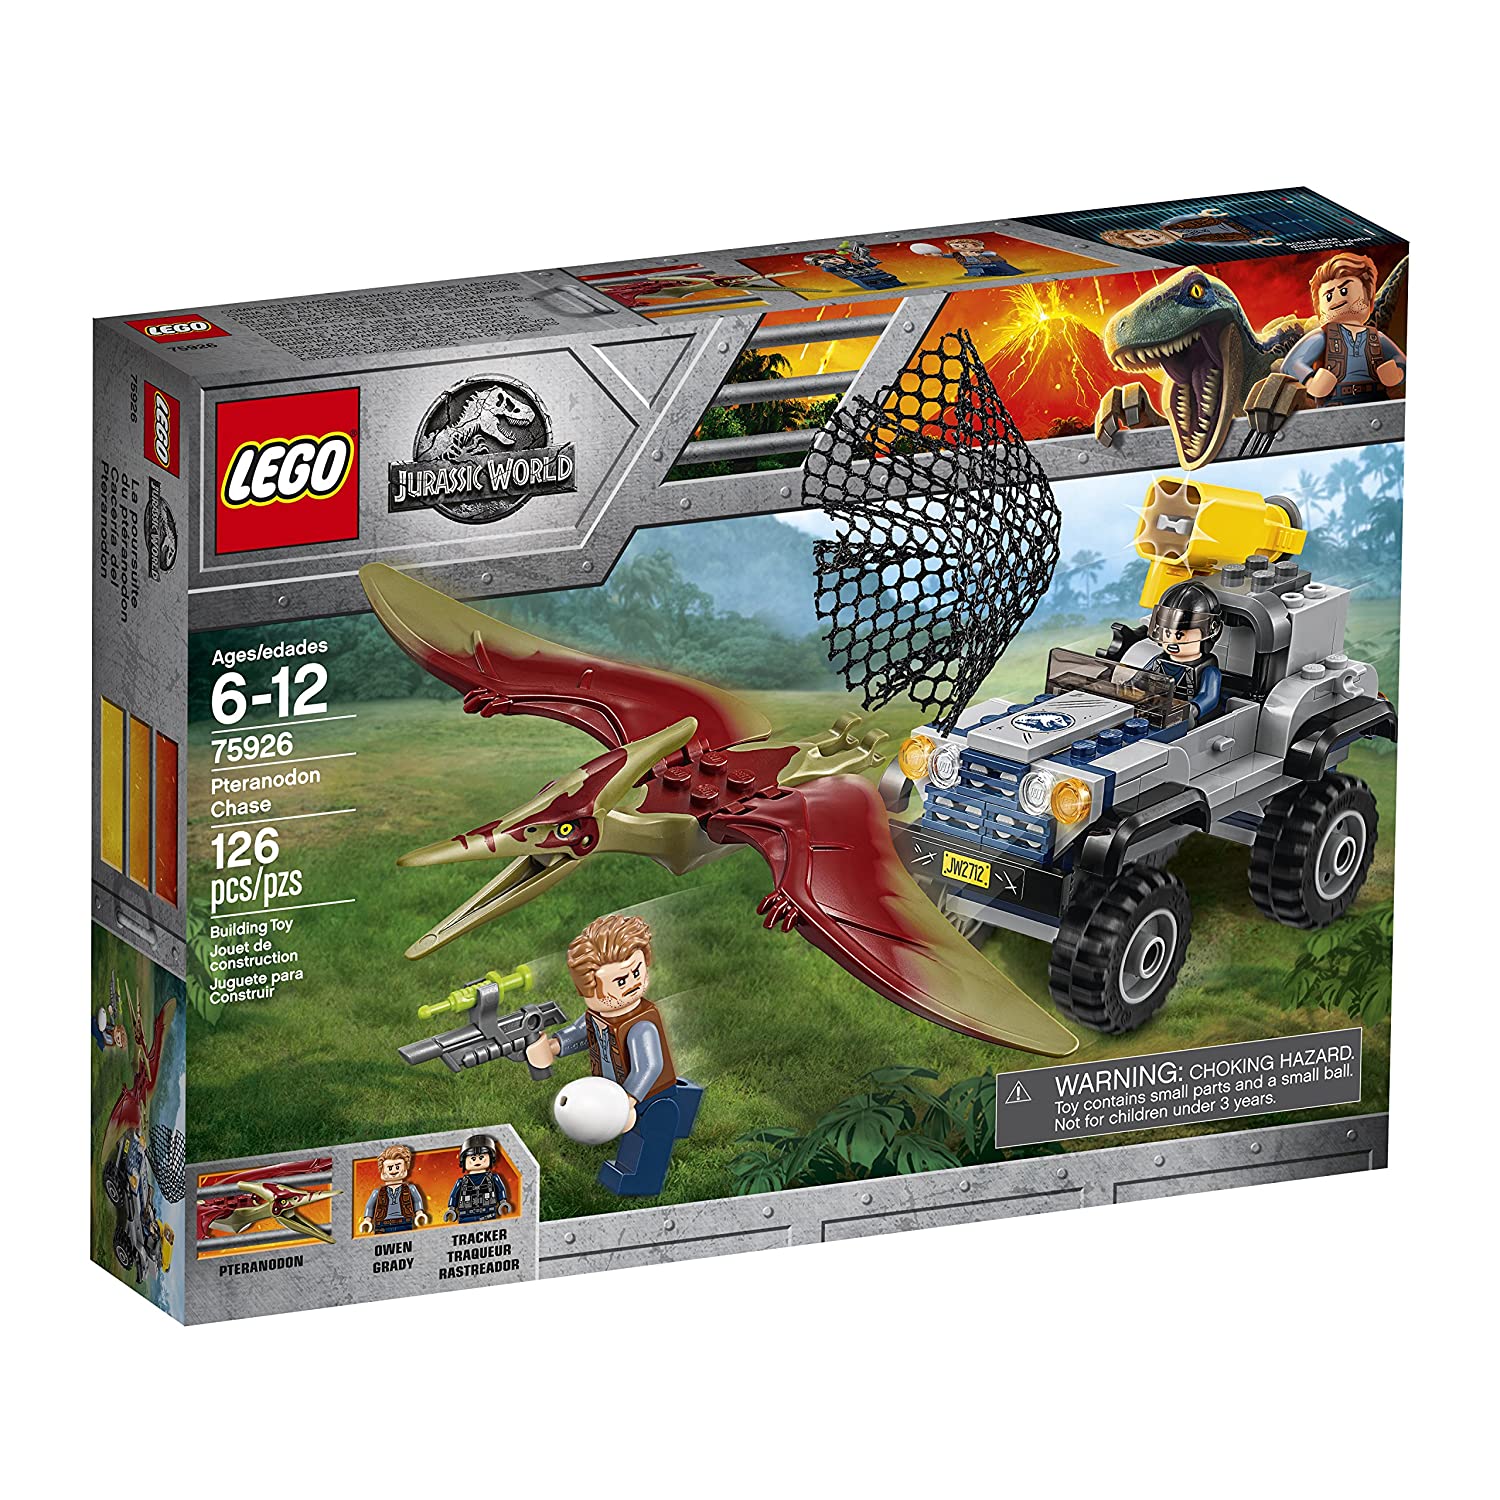 Top 9 Best Lego Jurassic Park Sets Reviews in 2022 5